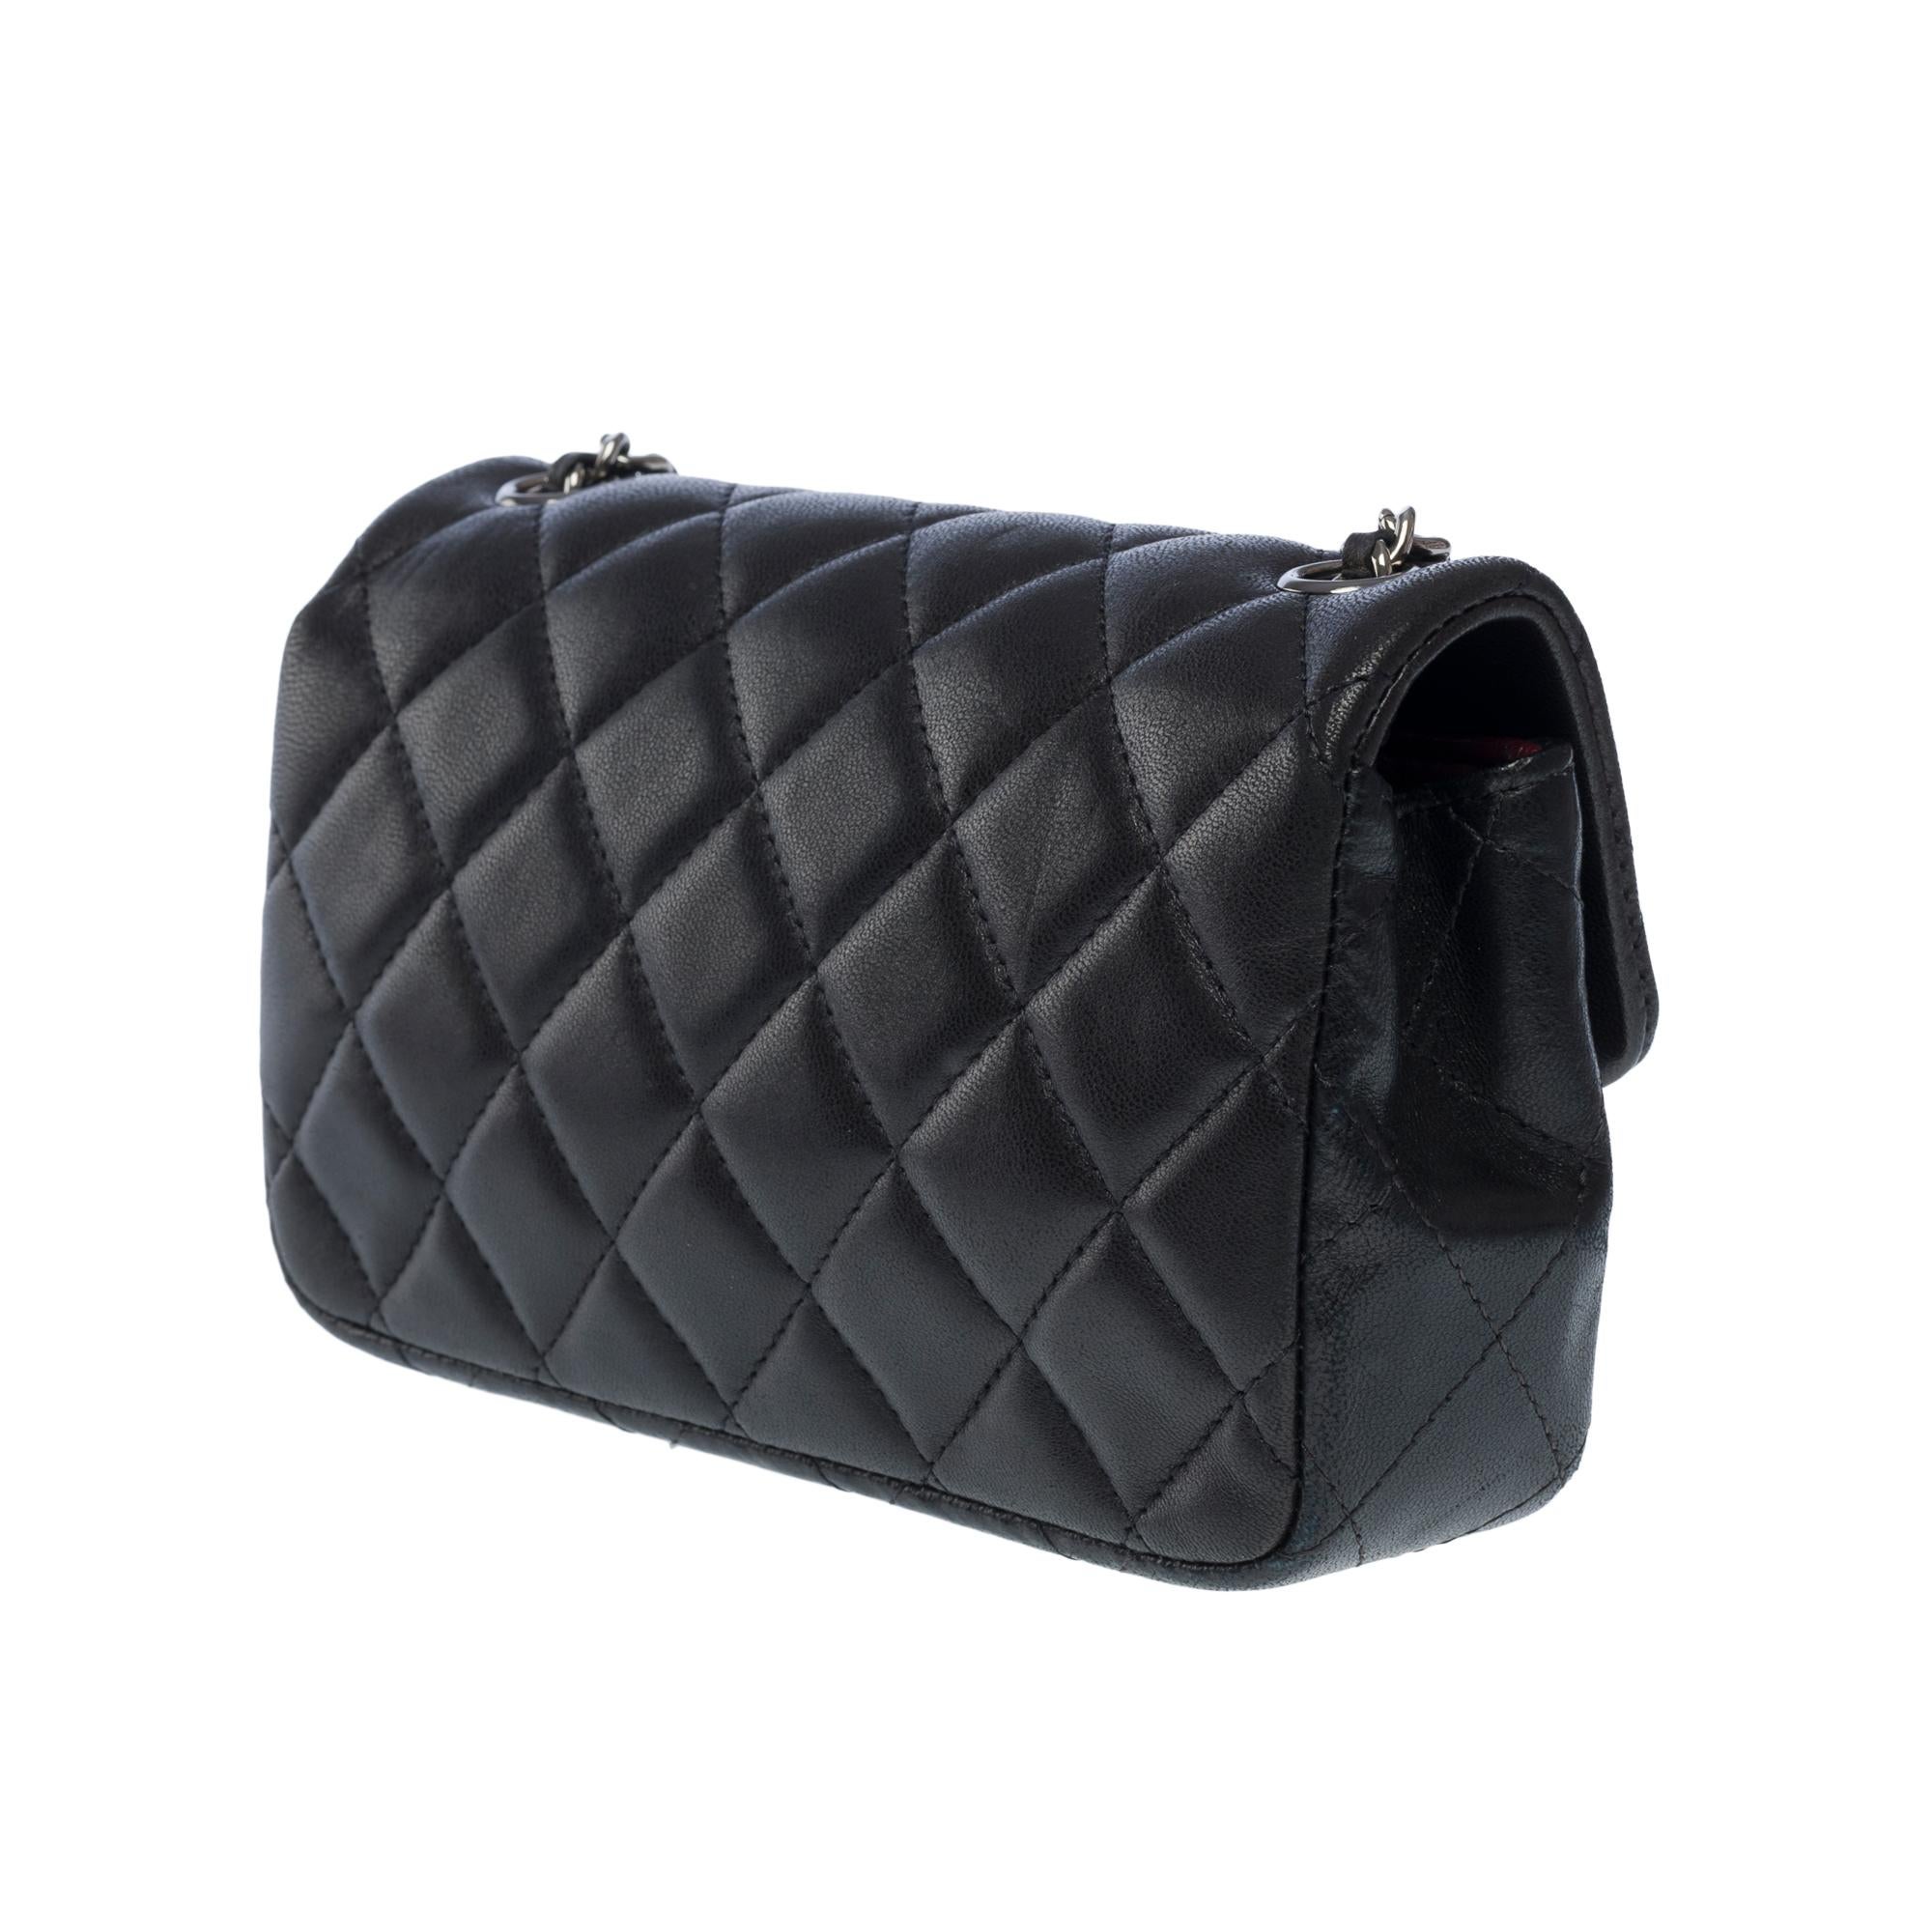 Beautiful Chanel Timeless Mini shoulder Flap bag in Black quilted lambskin, BSHW 2